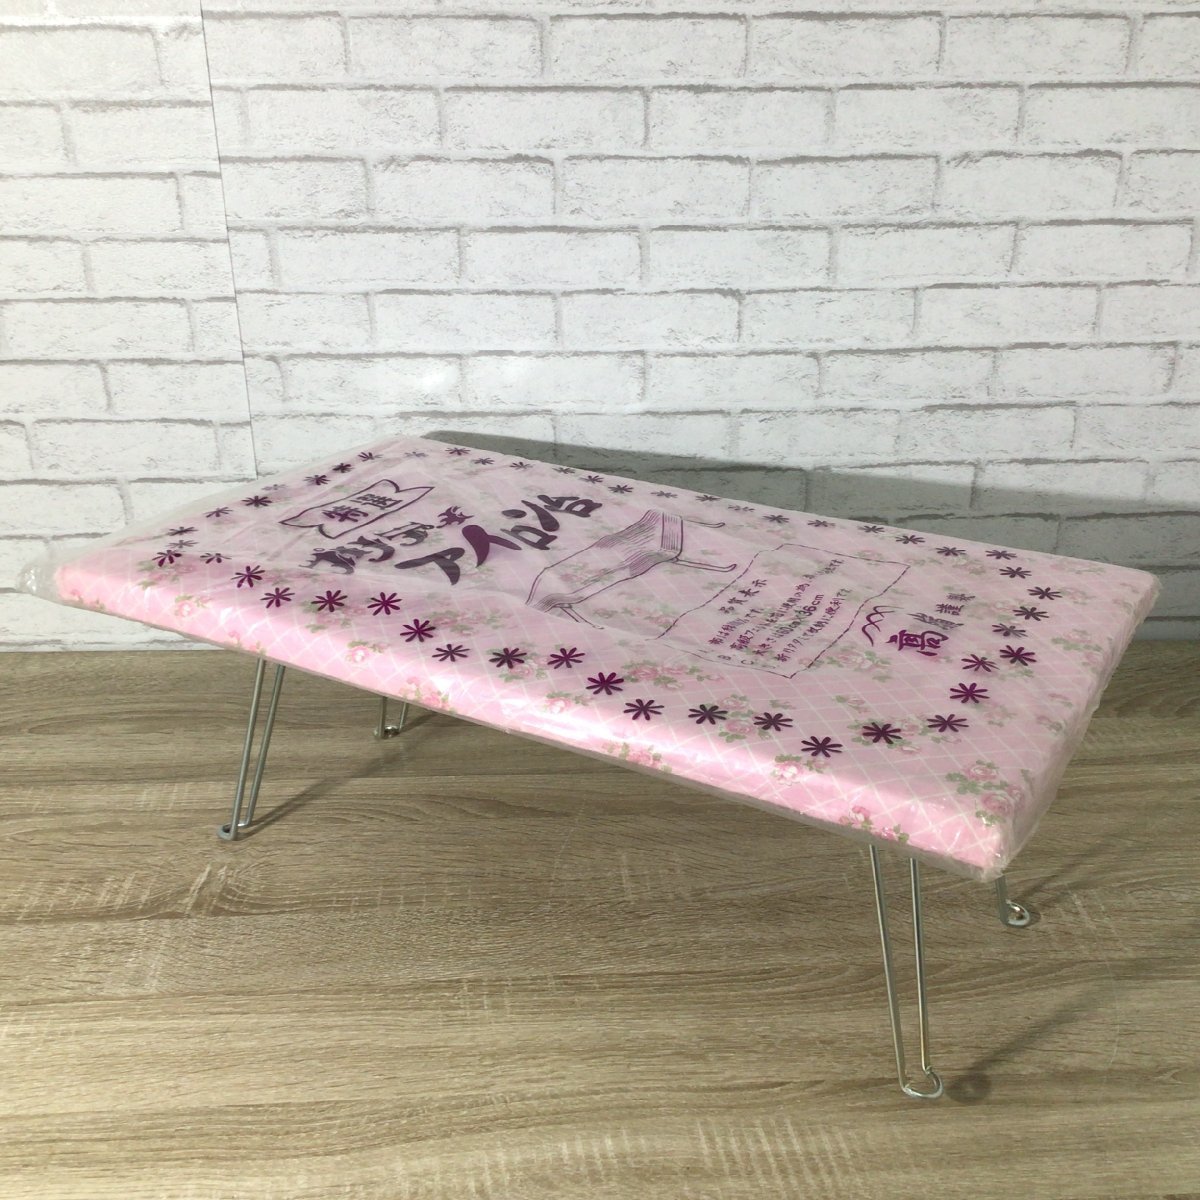 2541 [ unused ] height . quality product ironing board floral print Showa Retro pliti ironing board pink dead stock 